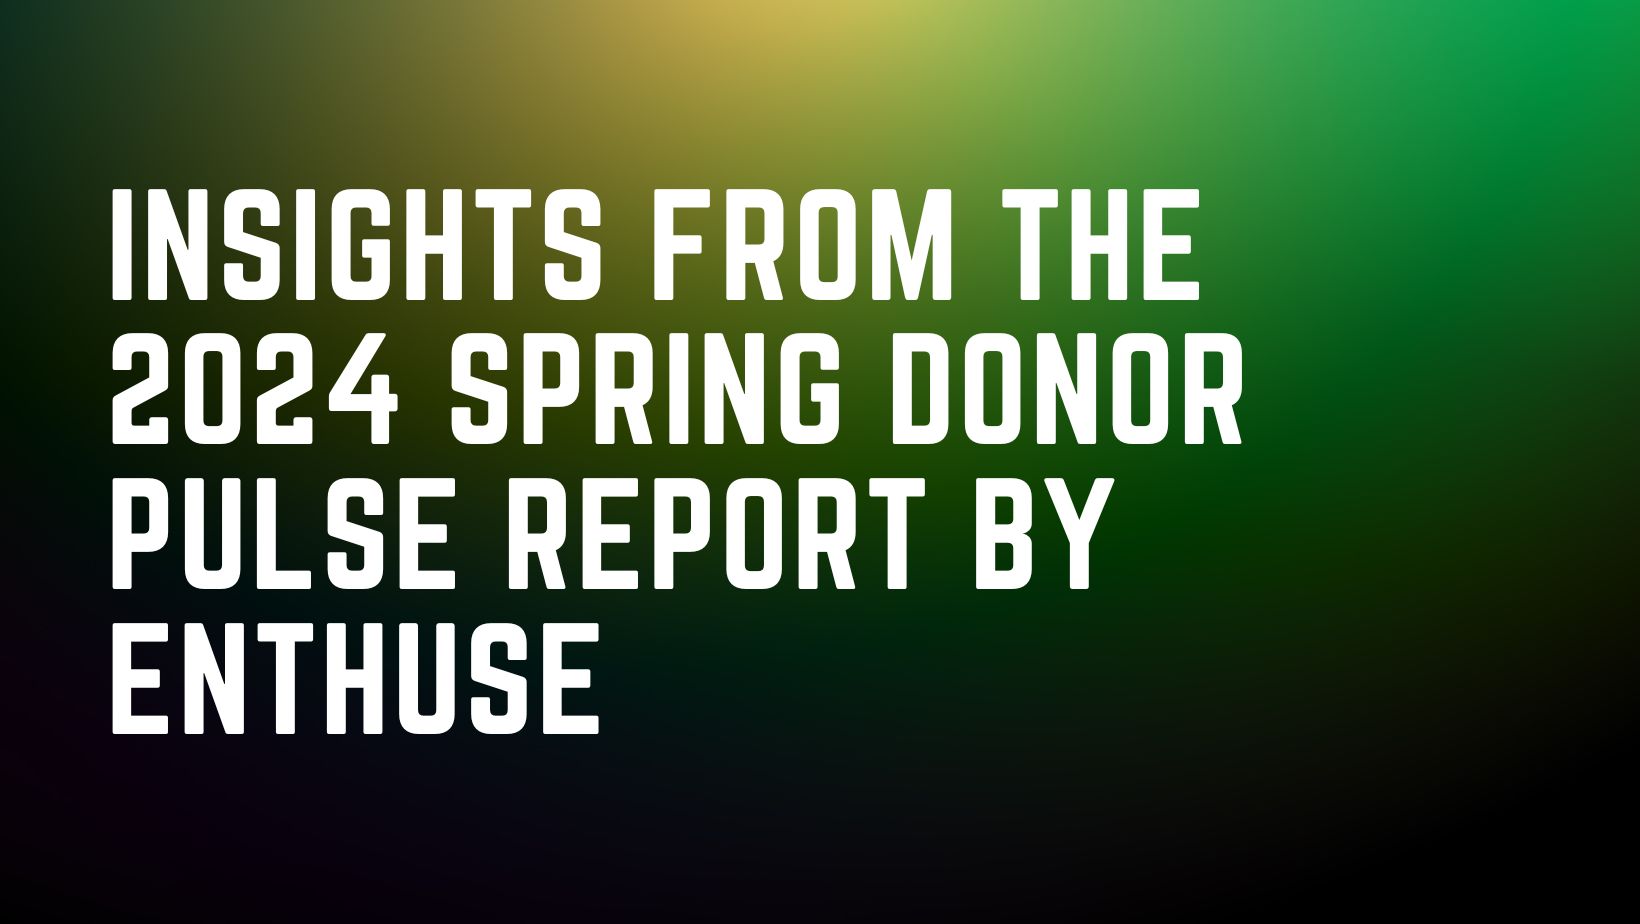 Insights from the 2024 Spring Donor Pulse Report